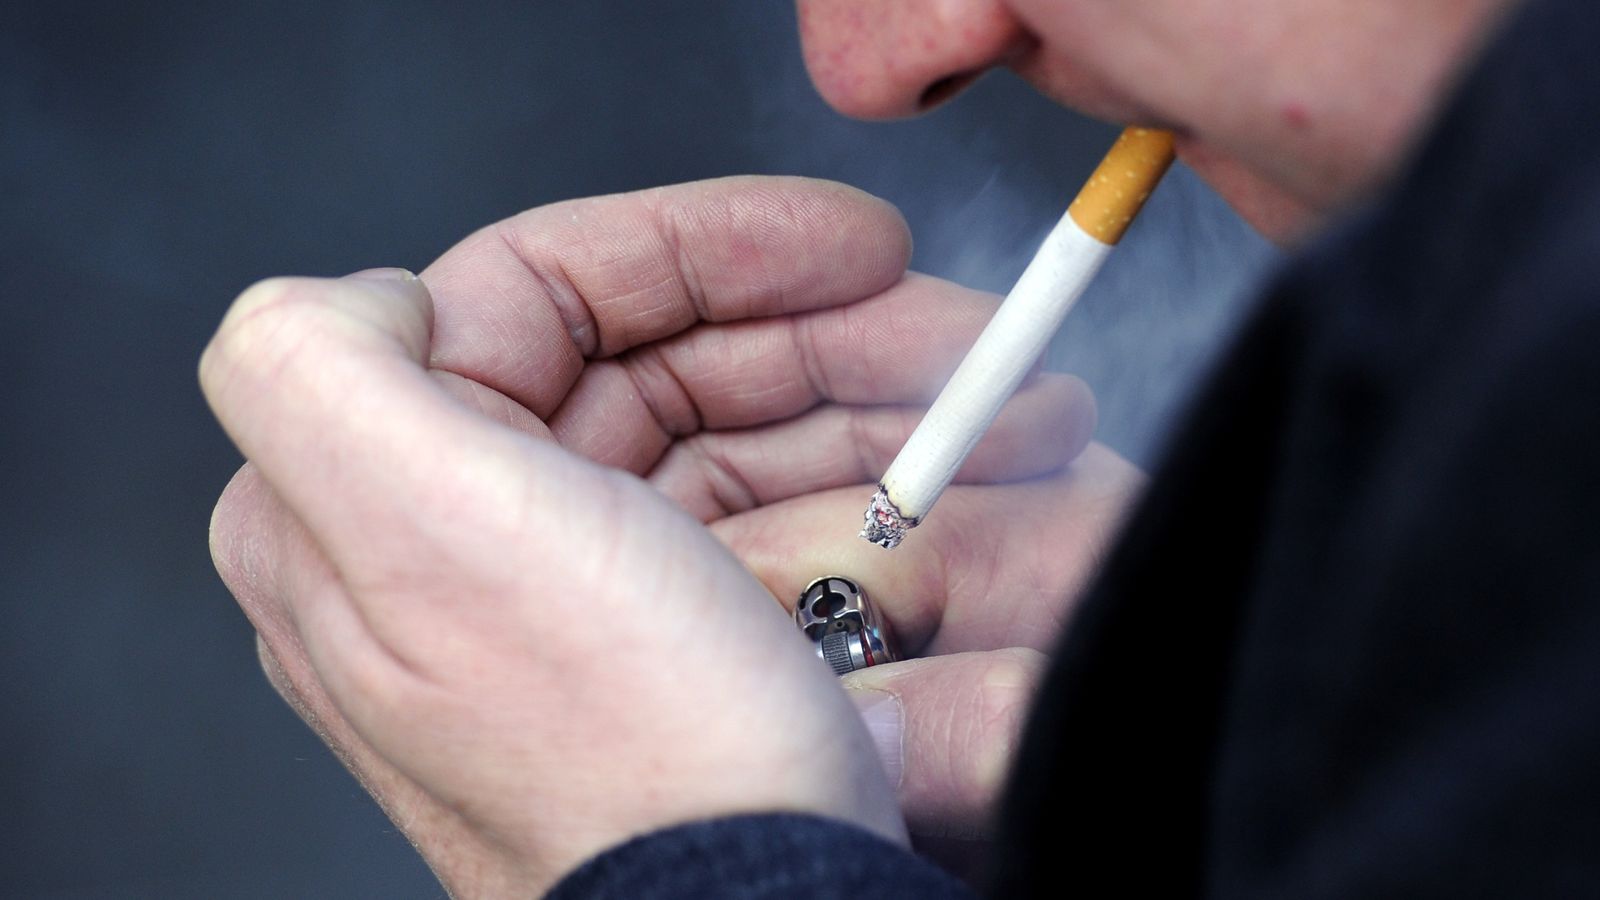 Targets to make England 'smoke free' by 2030 will be missed by nearly a decade, charity warns